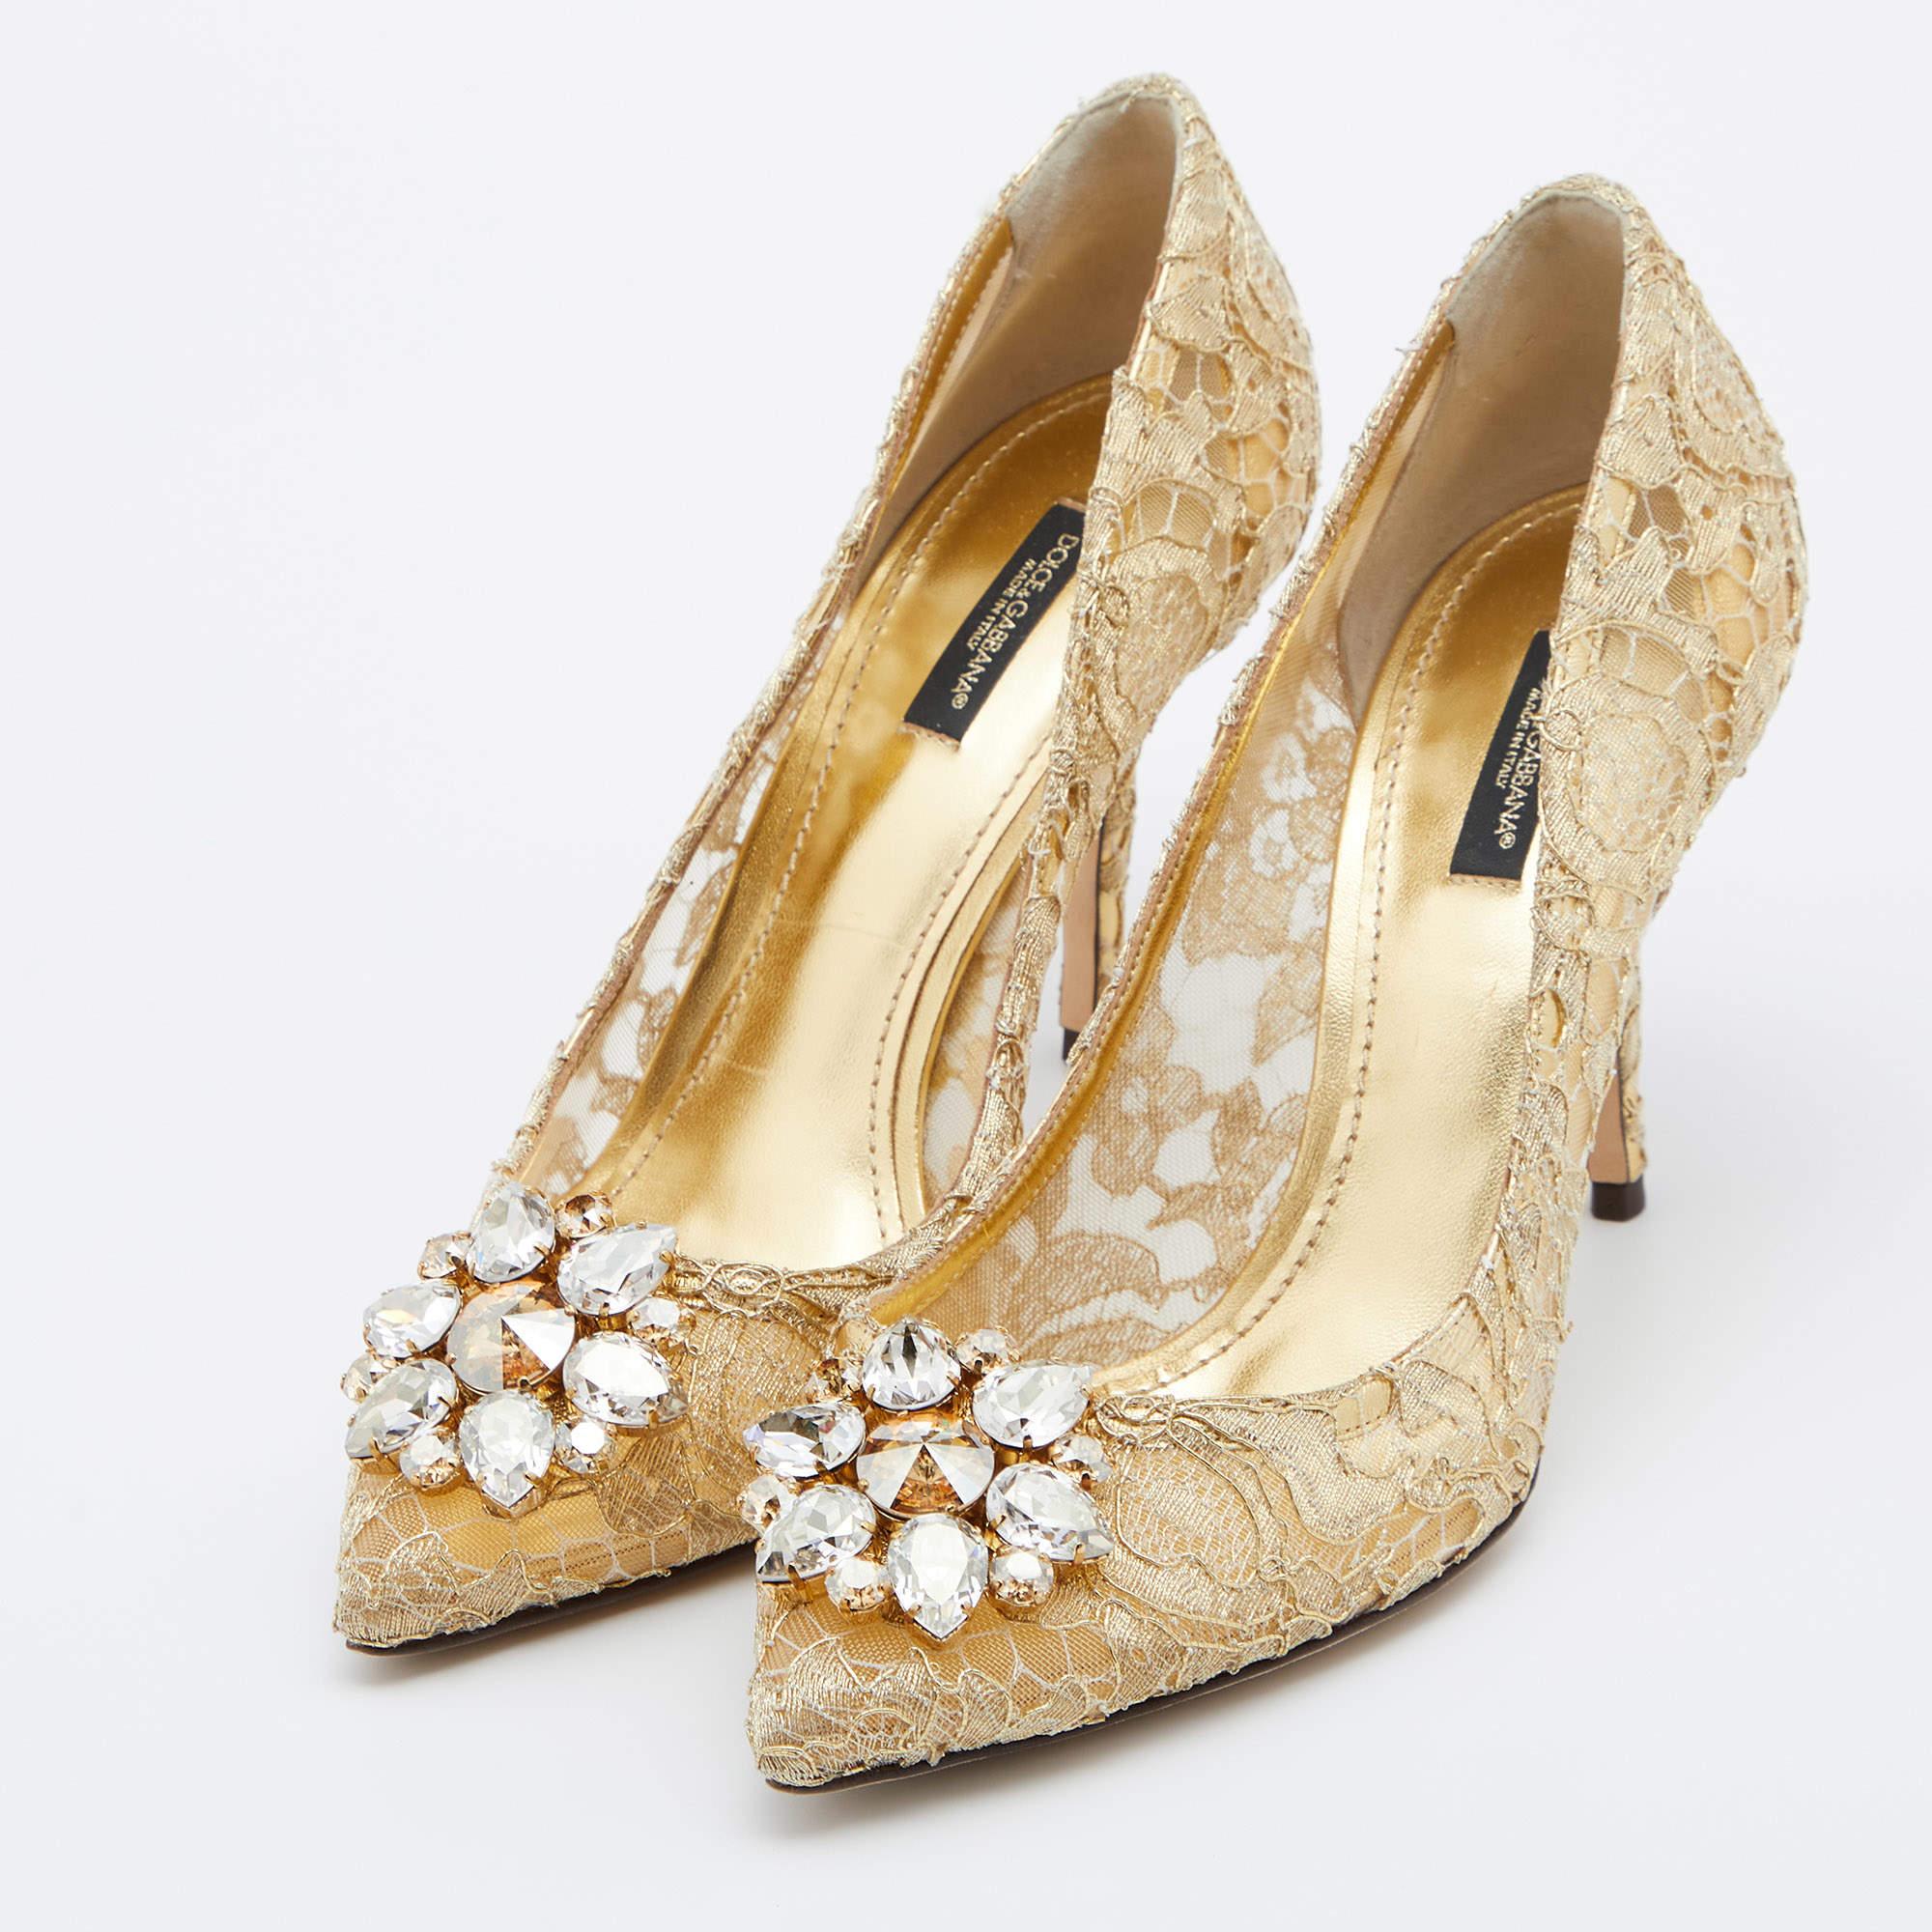 Dolce & Gabbana Gold Lace Crystal Embellished Bellucci Pointed Toe Pumps Size 40 In Good Condition In Dubai, Al Qouz 2